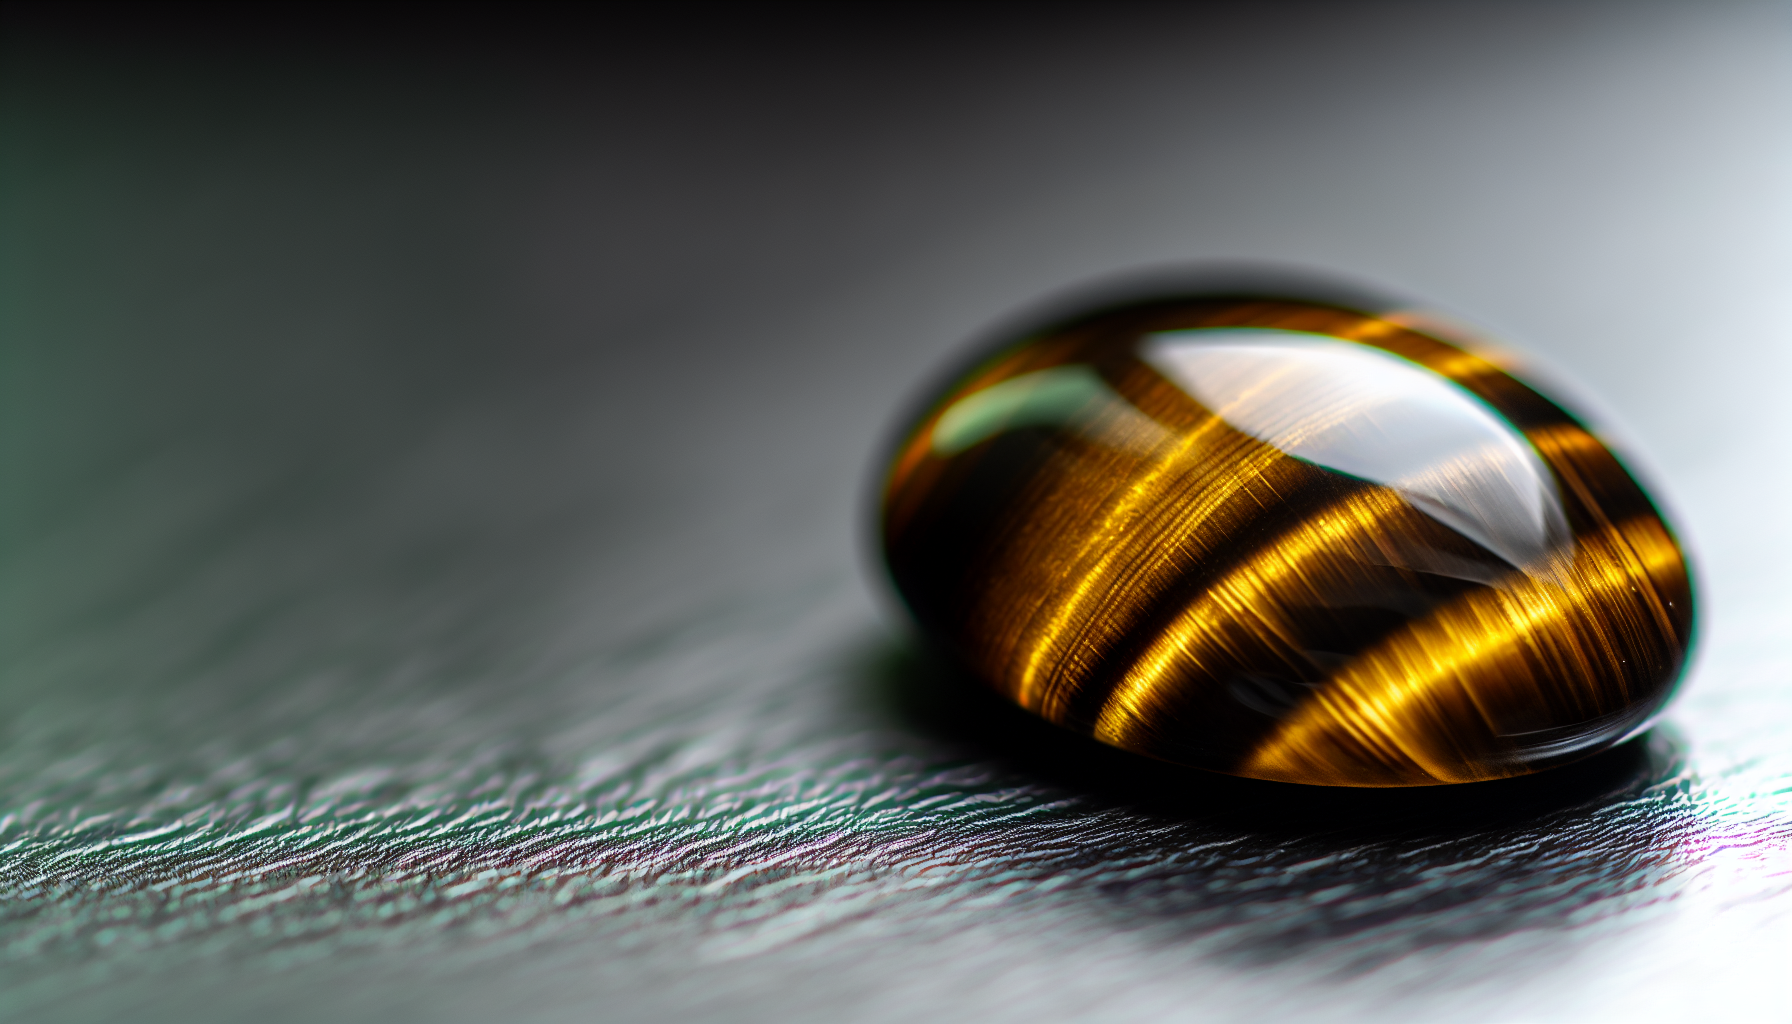 Tiger's Eye gemstone with golden-brown bands